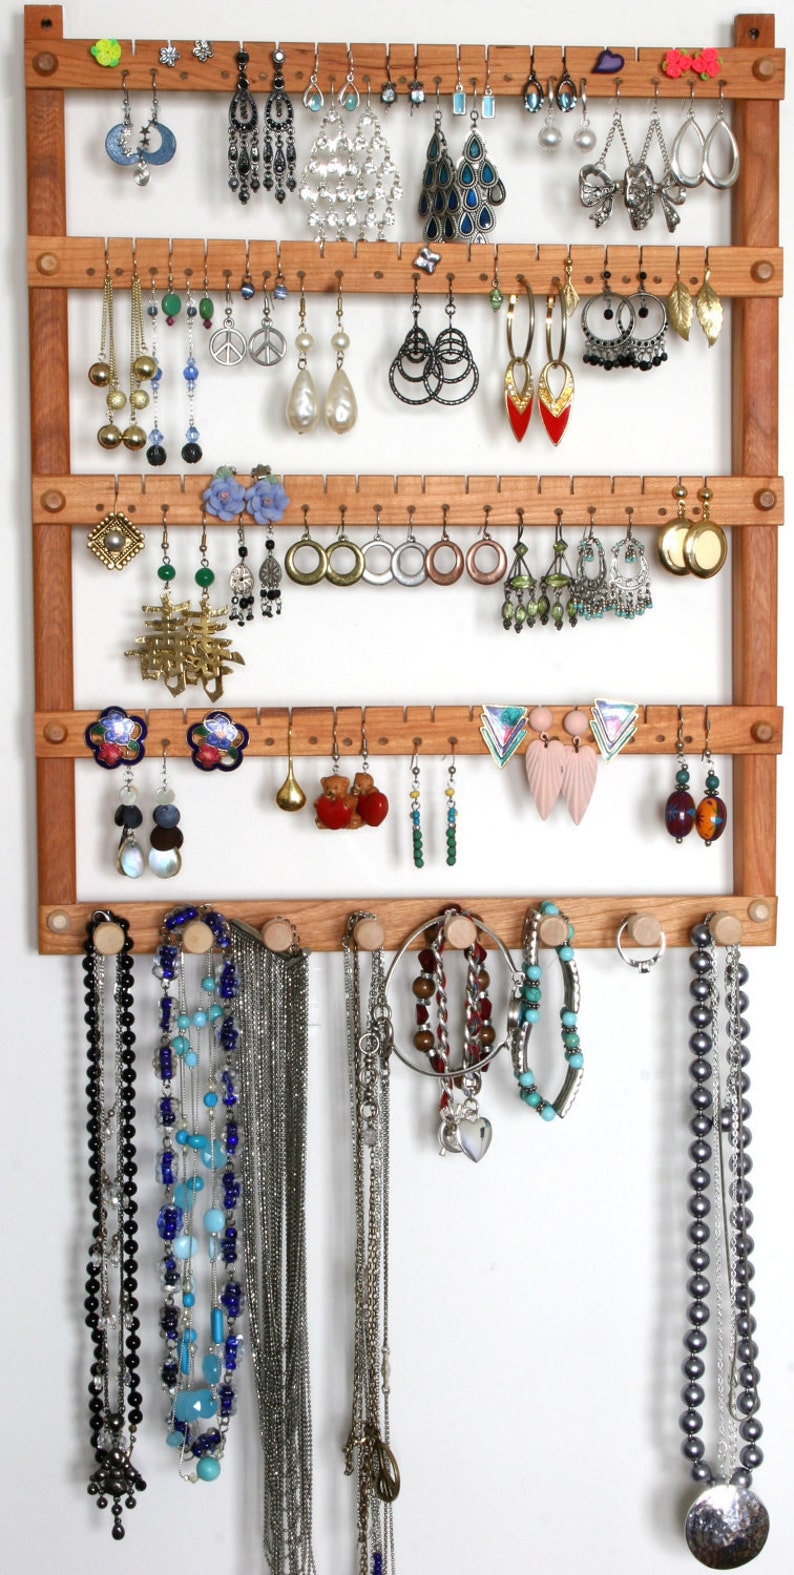 Wood Cherry Earring and Necklace Wall Organizer Earring Holder Jewelry Holder Holds 72 pairs of Earrings 8 pegs Jewelry Organizer image 2